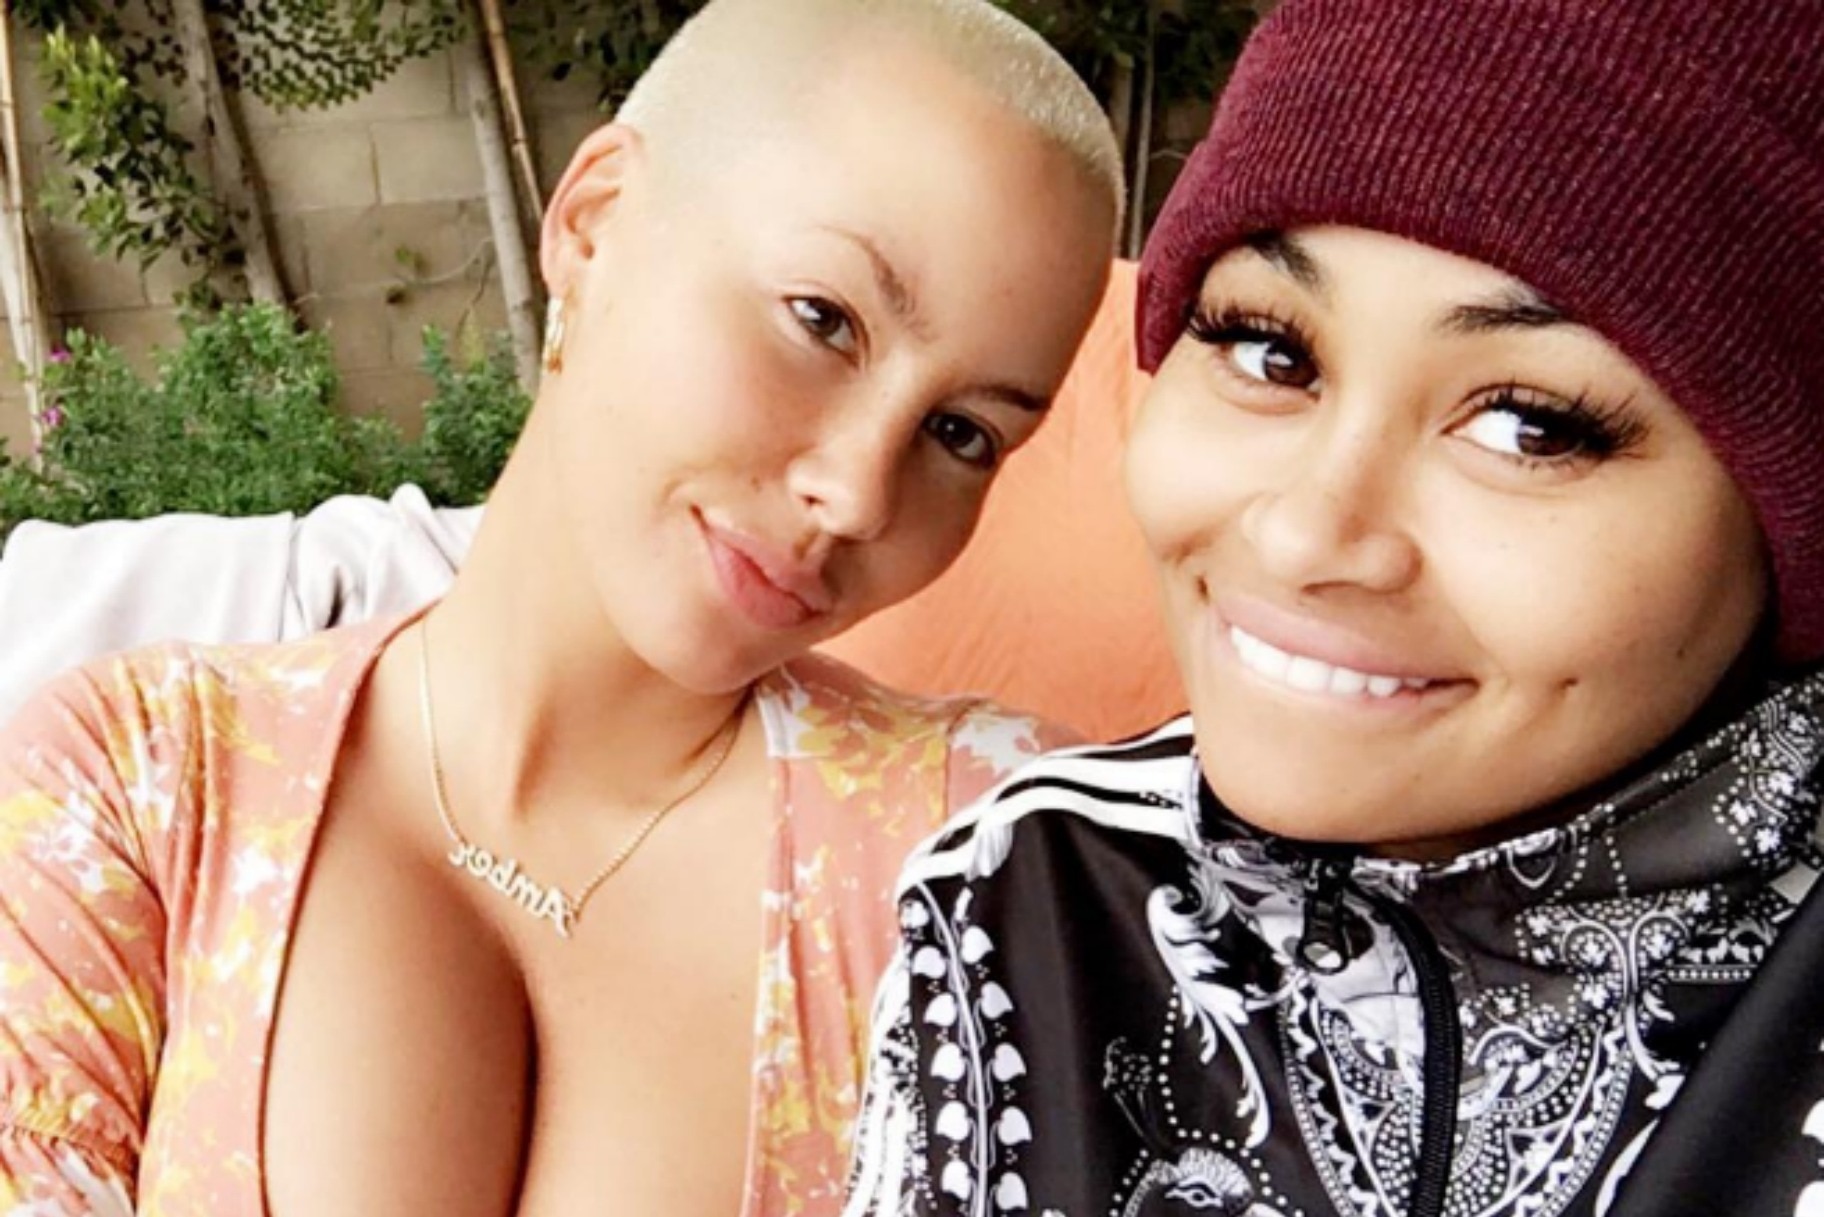 Amber Rose Posted A Super Sweet Tribute To Her Bestie Blac Chyna On Instagram | Very Real1824 x 1217